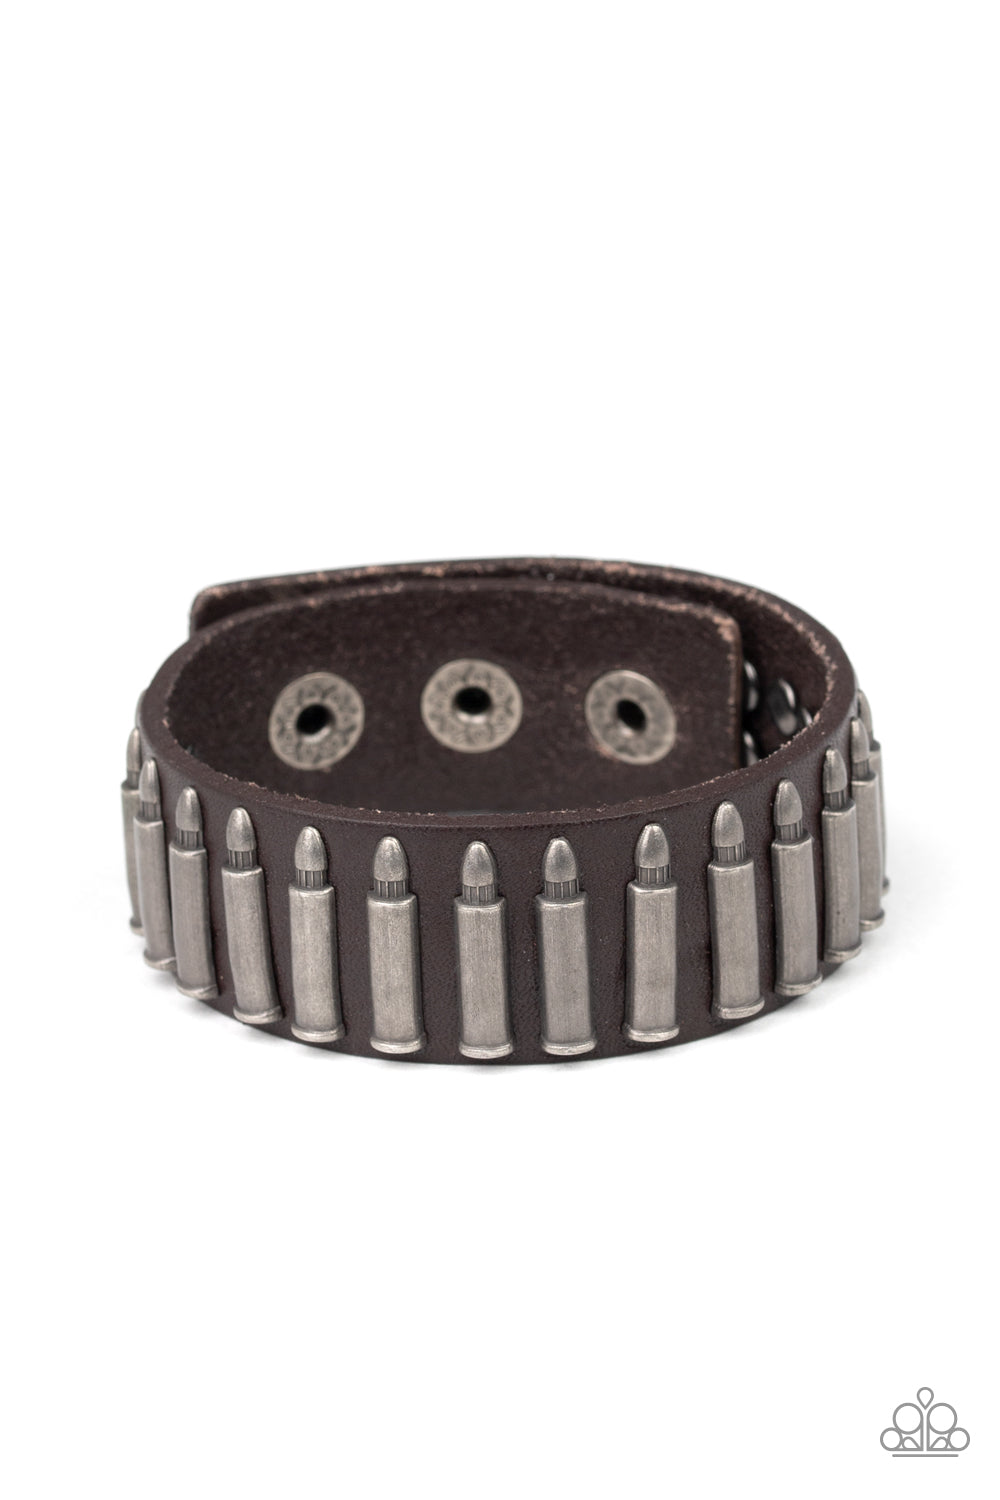 five-dollar-jewelry-armed-and-dangerous-brown-bracelet-paparazzi-accessories